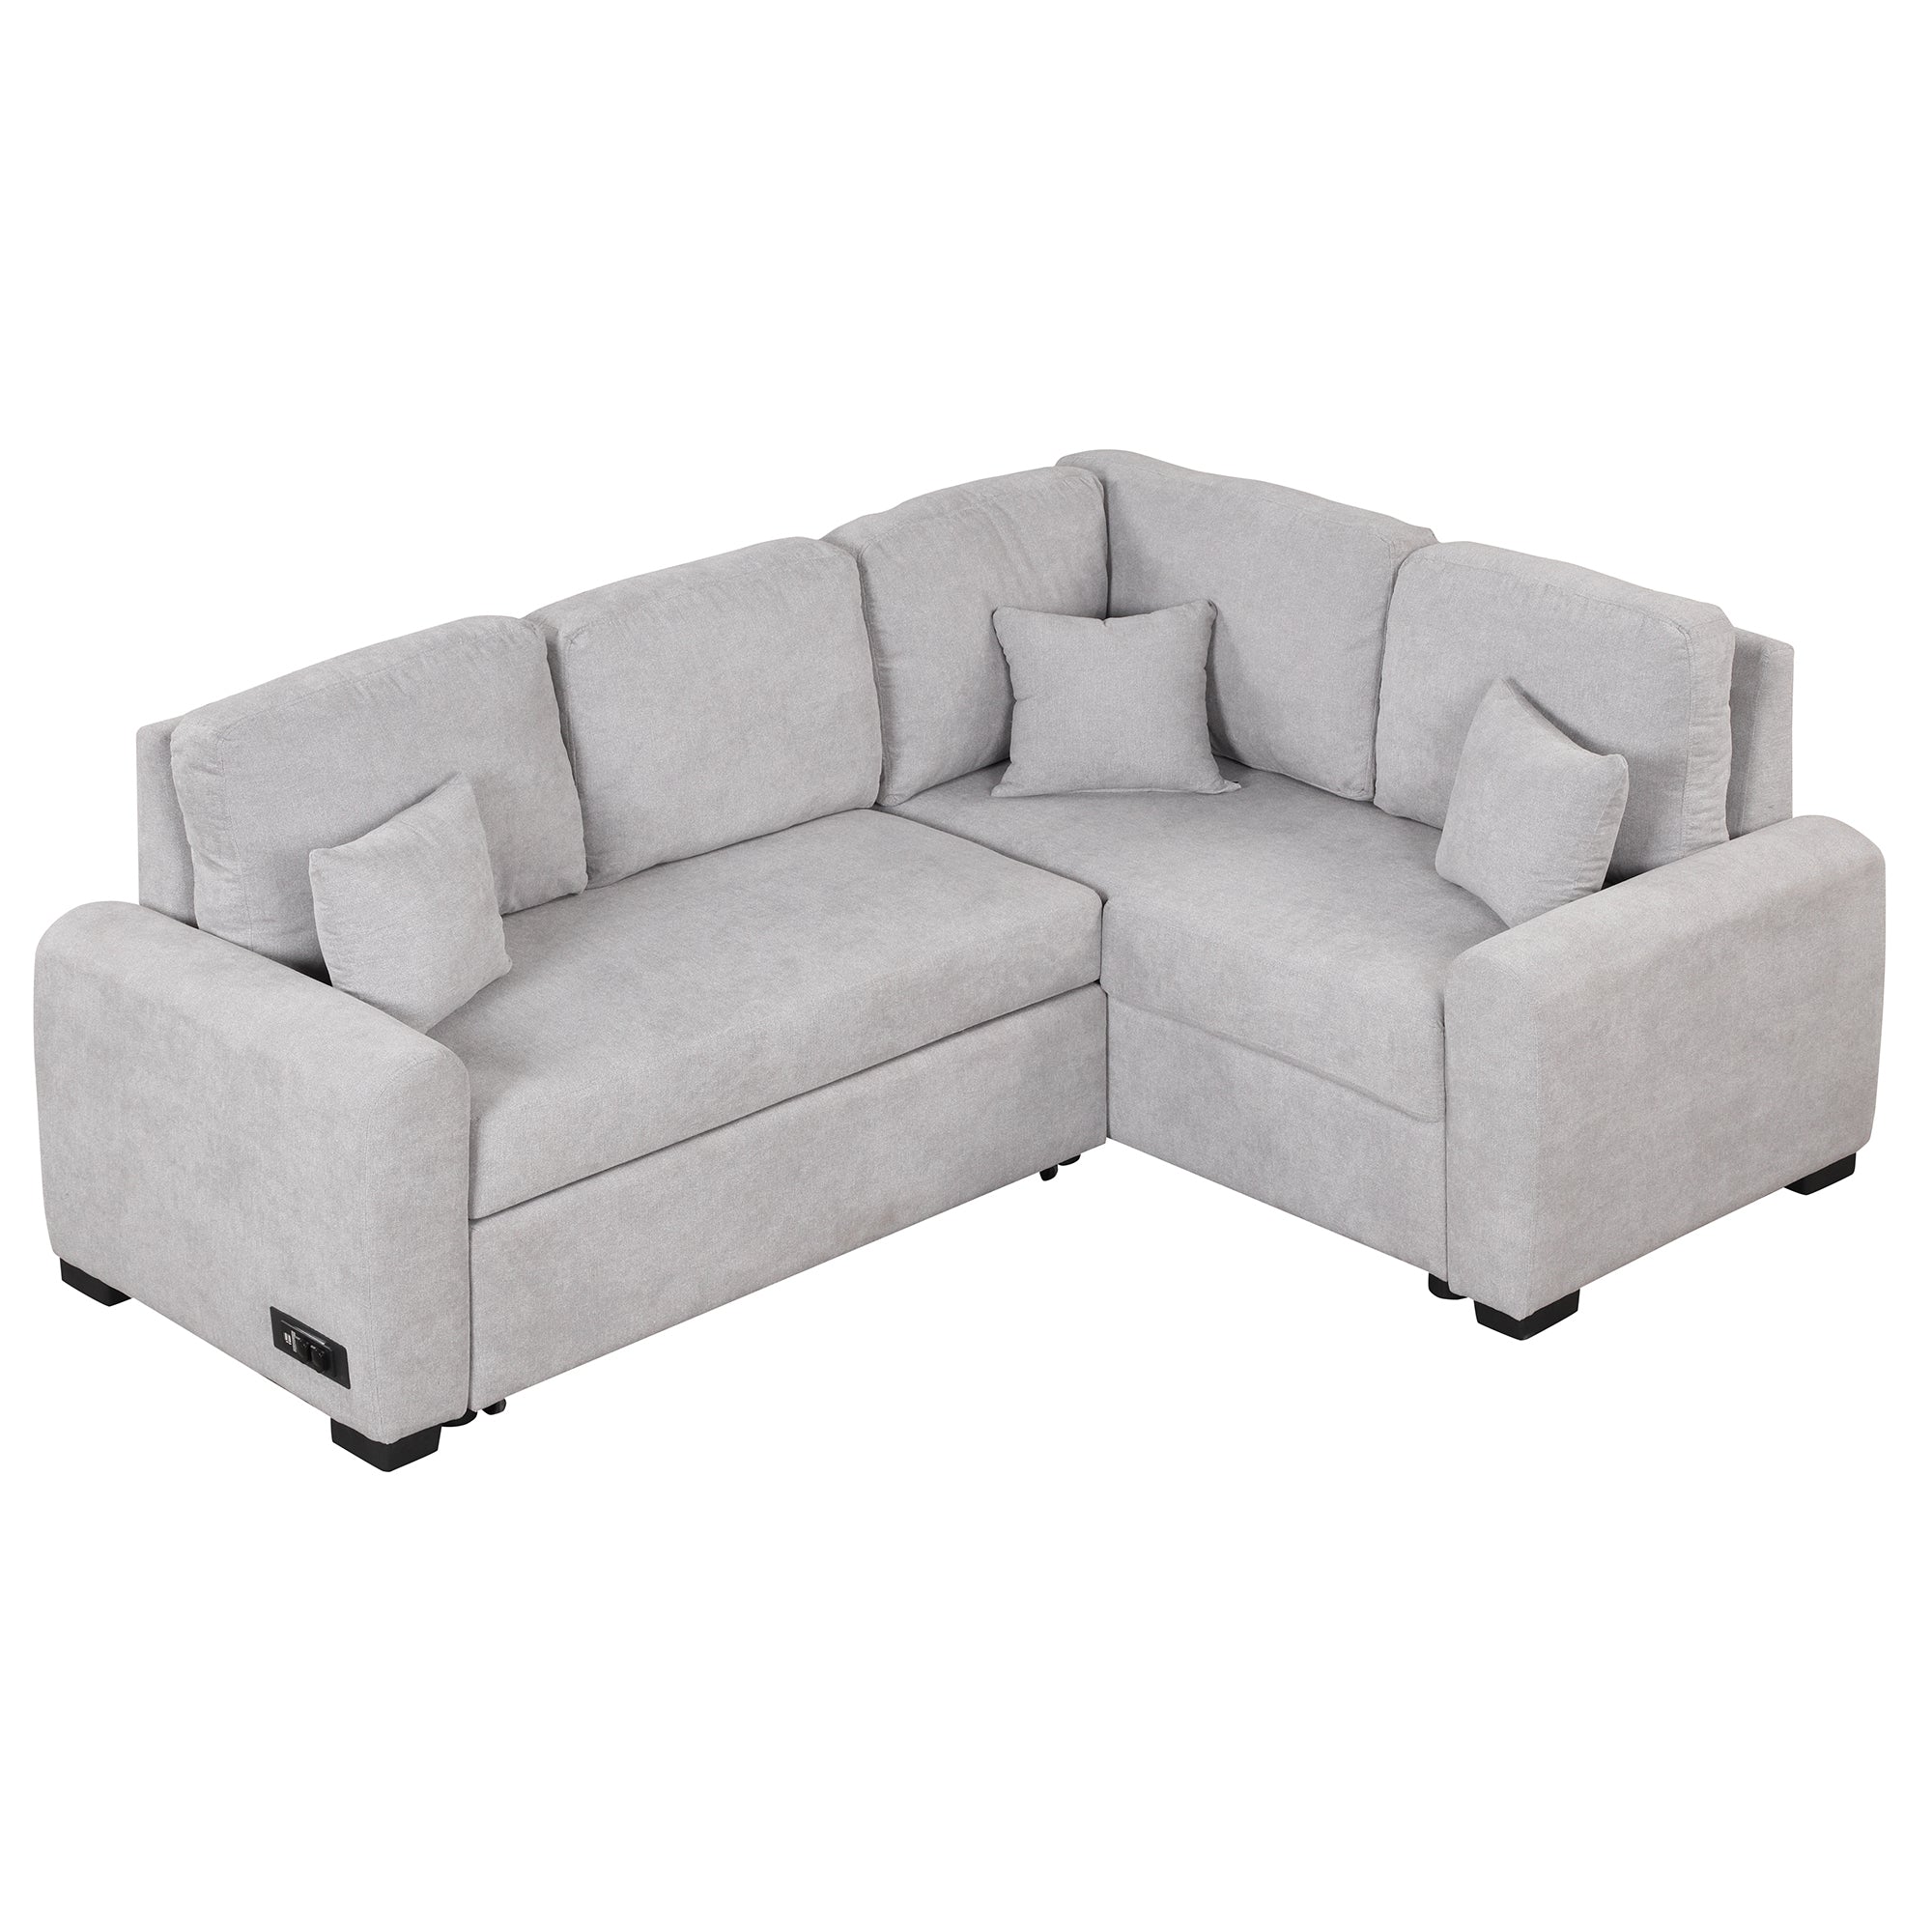 87.4" L-Shaped Sleeper Sectional Sofa w/ USB, Outlets, 3 Pillows - Grey-Sleeper Sectionals-American Furniture Outlet